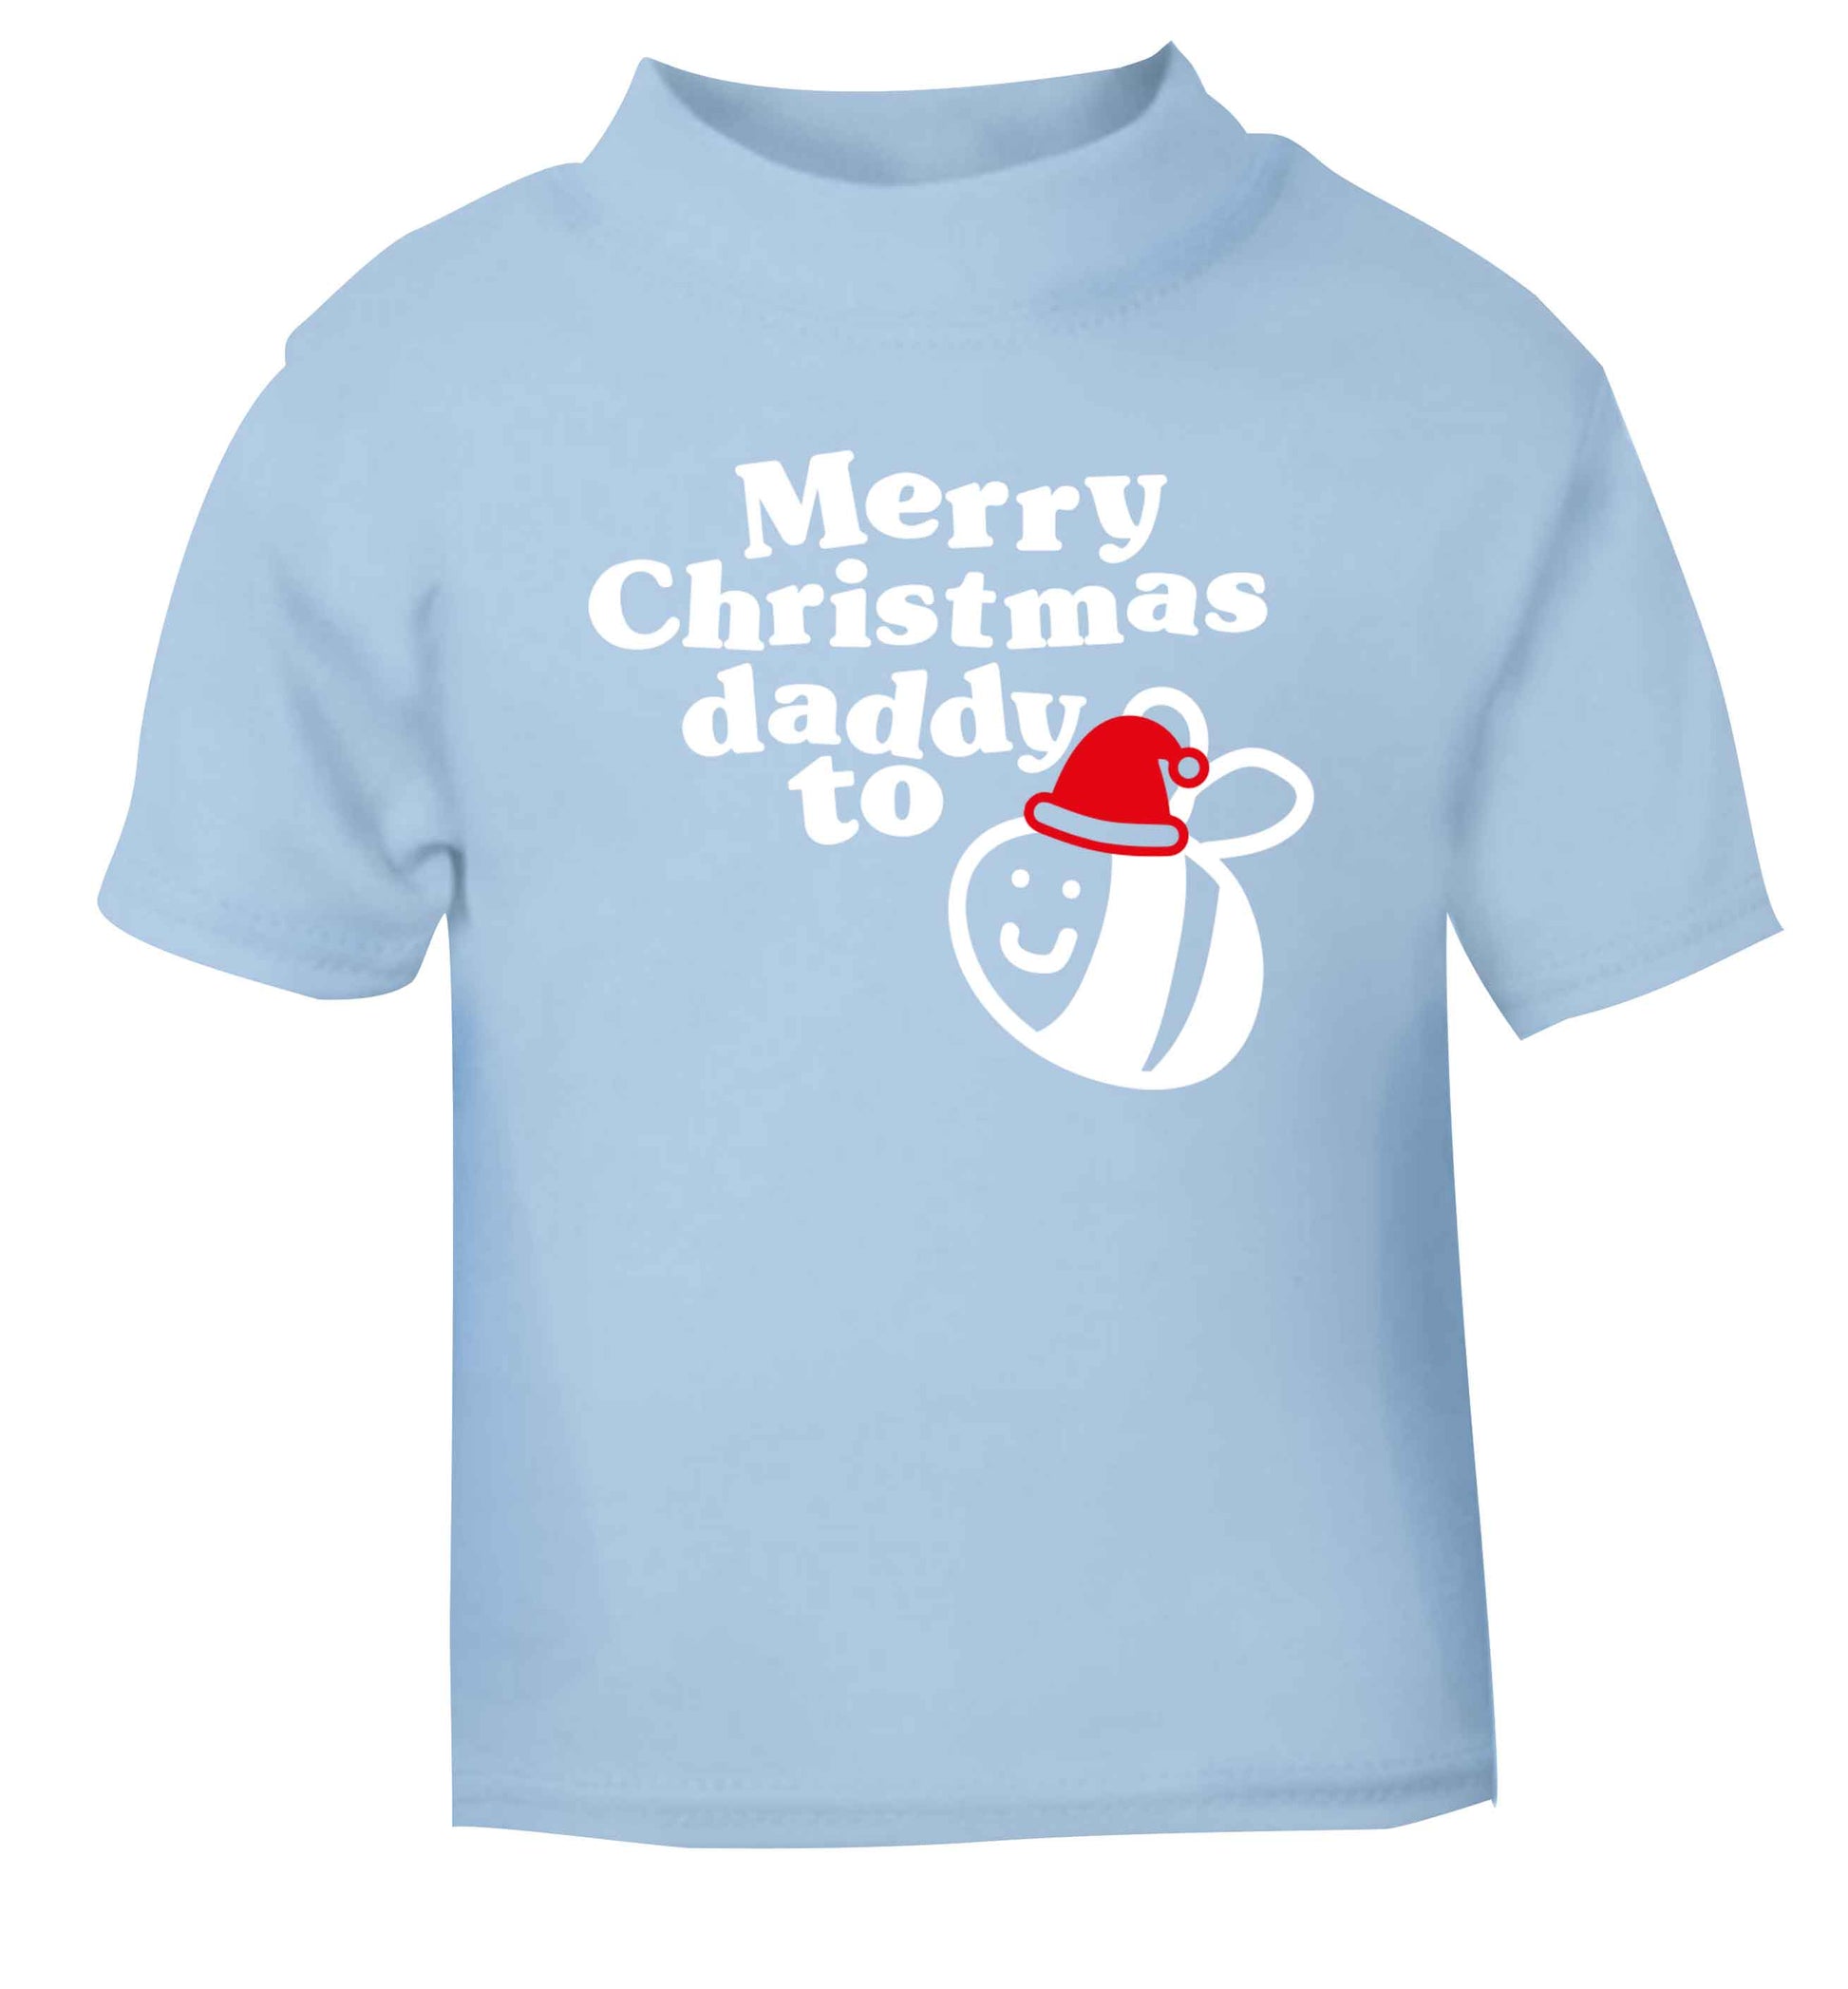 Merry Christmas daddy to be light blue Baby Toddler Tshirt 2 Years